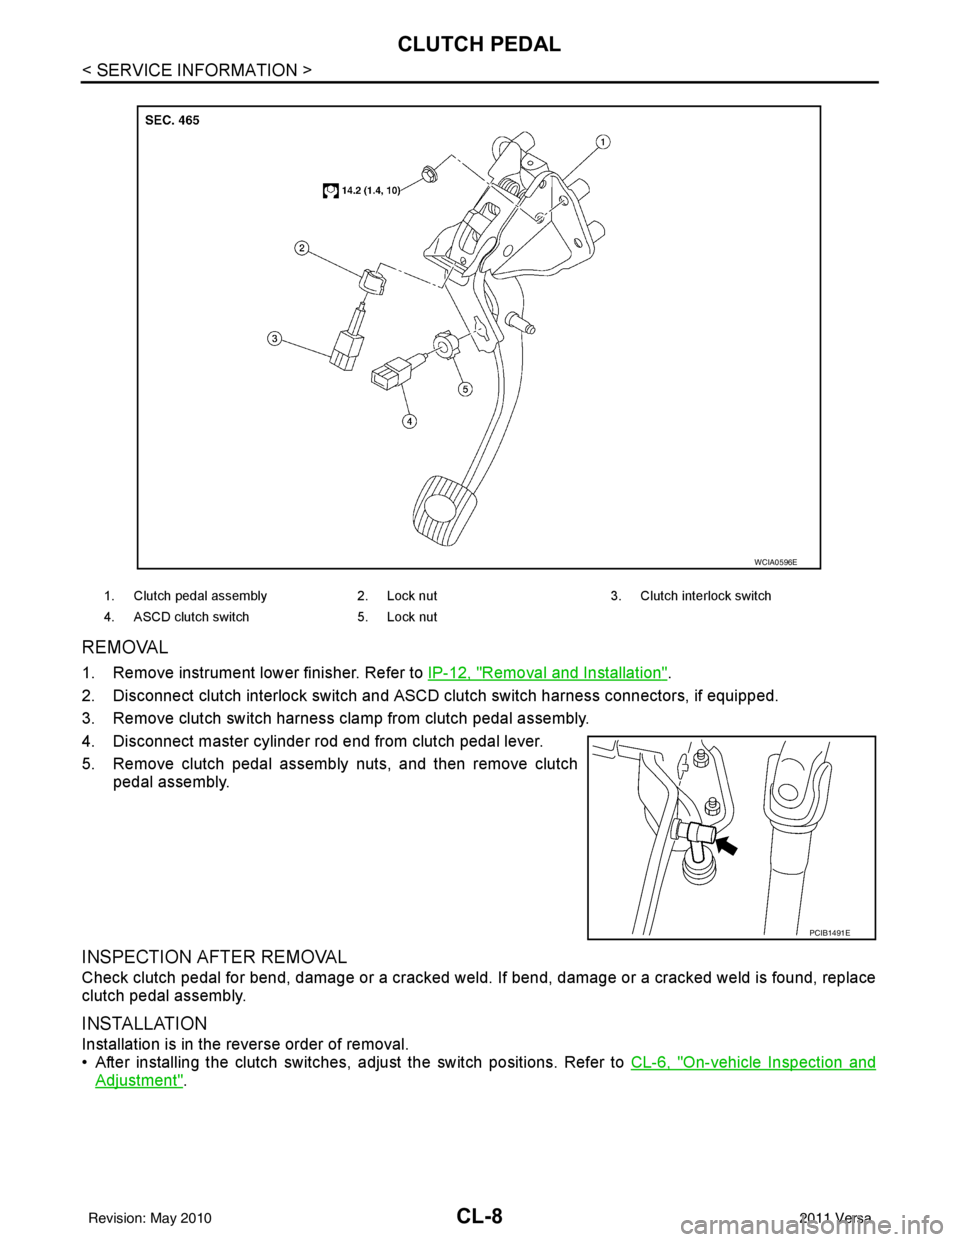 NISSAN LATIO 2011  Service Repair Manual CL-8
< SERVICE INFORMATION >
CLUTCH PEDAL
REMOVAL
1. Remove instrument lower finisher. Refer to IP-12, "Removal and Installation".
2. Disconnect clutch interlock switch and ASCD clutch switch harness 